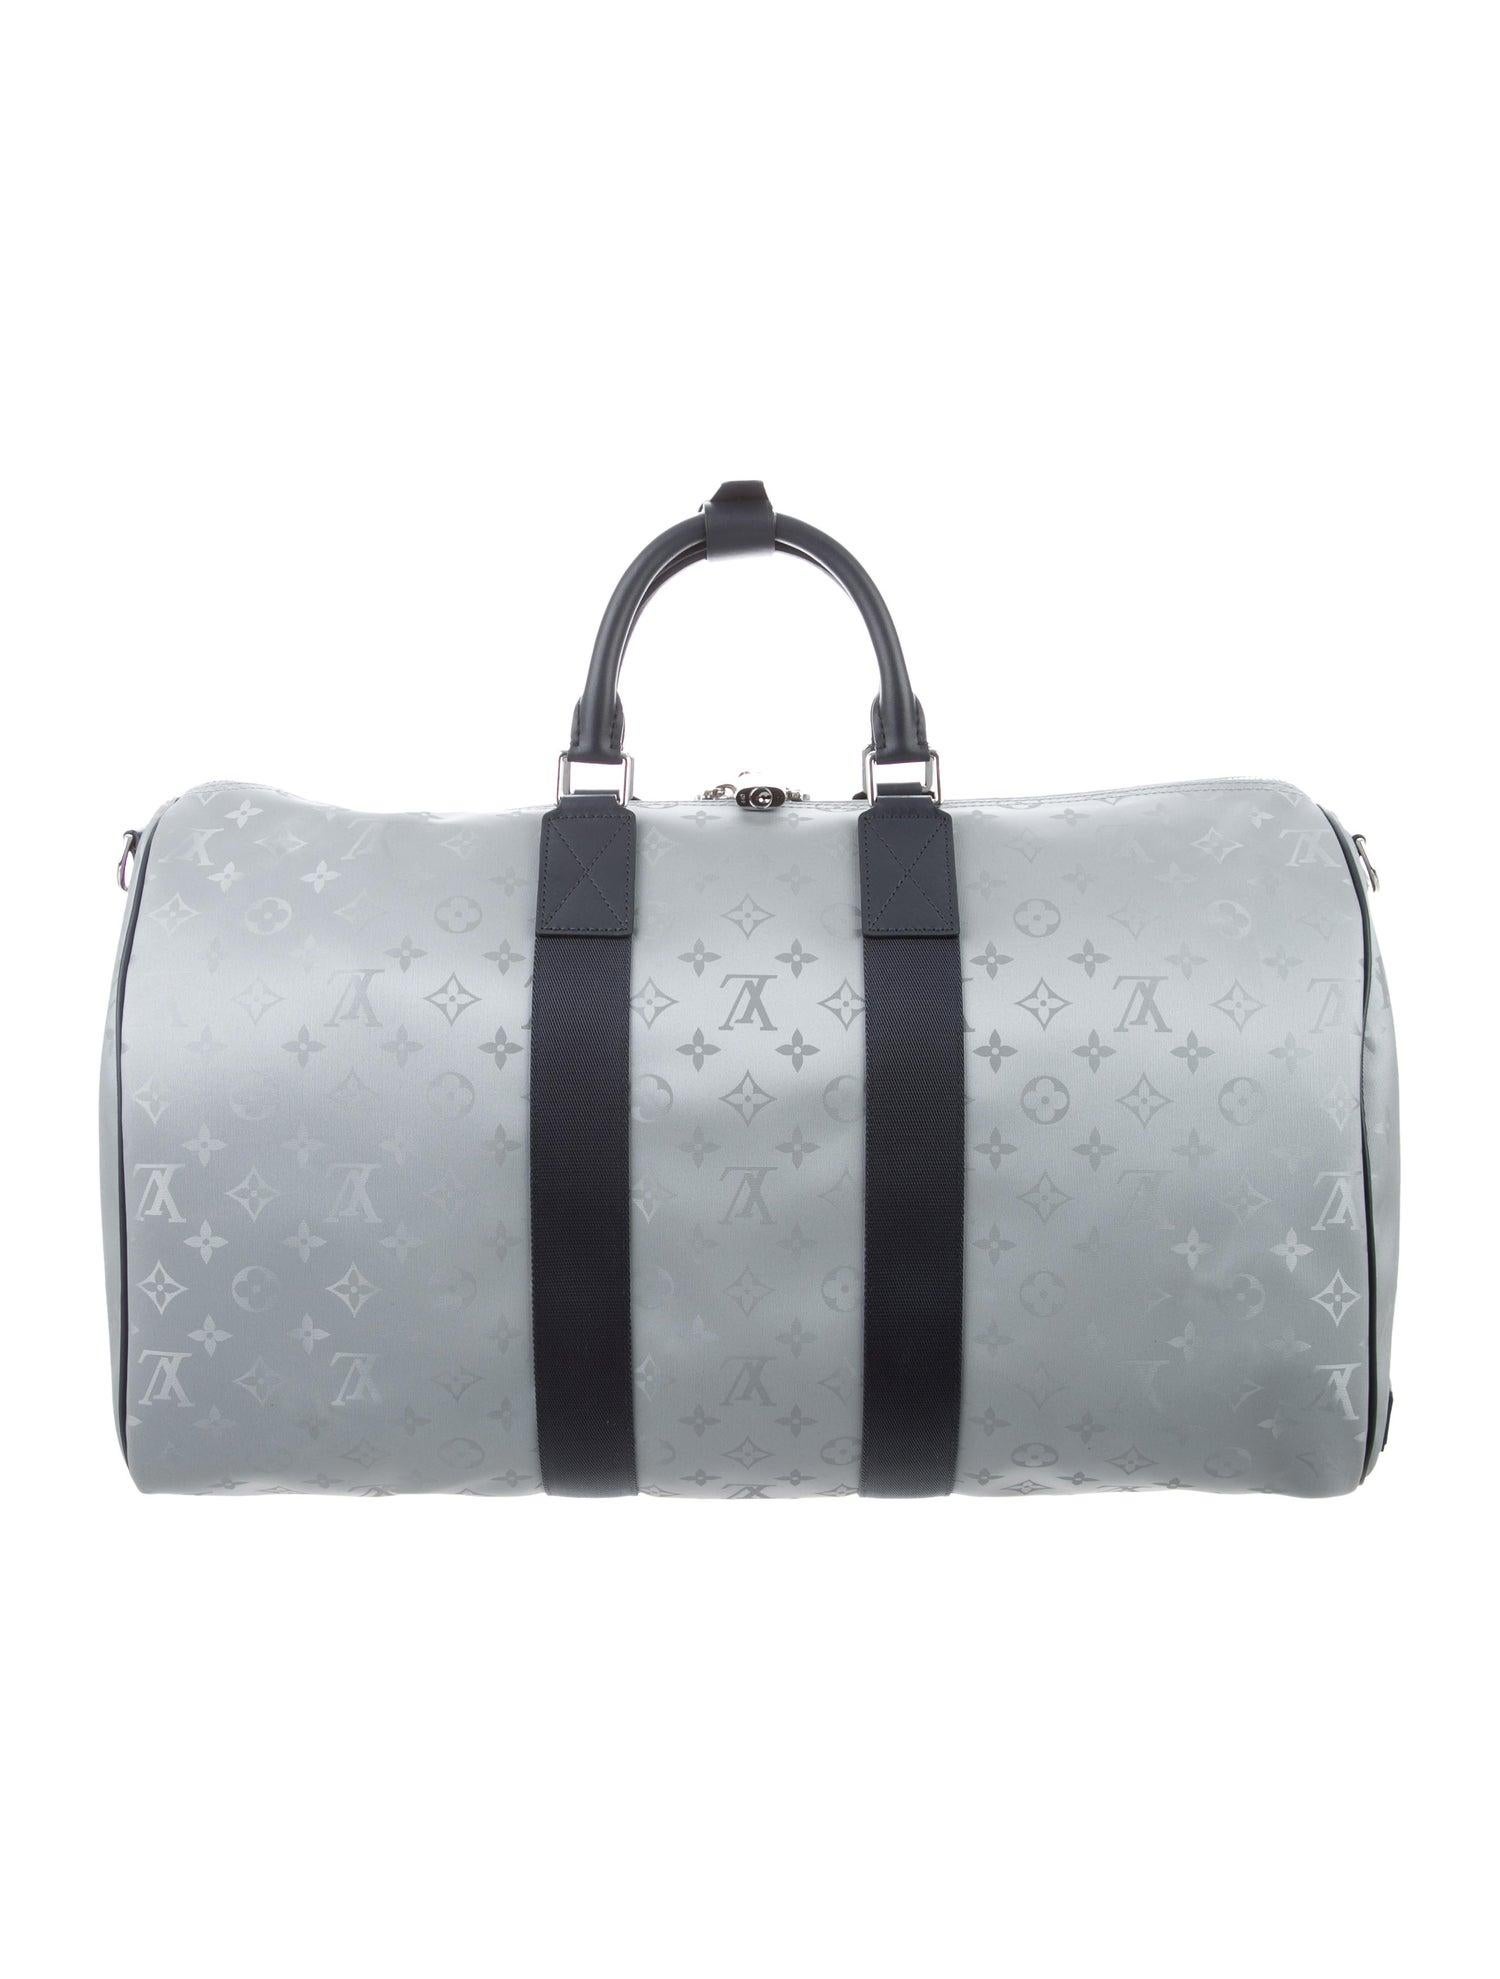 Mens Soft Sided Luggage  Luxury Travel Duffle Bags  LOUIS VUITTON   3